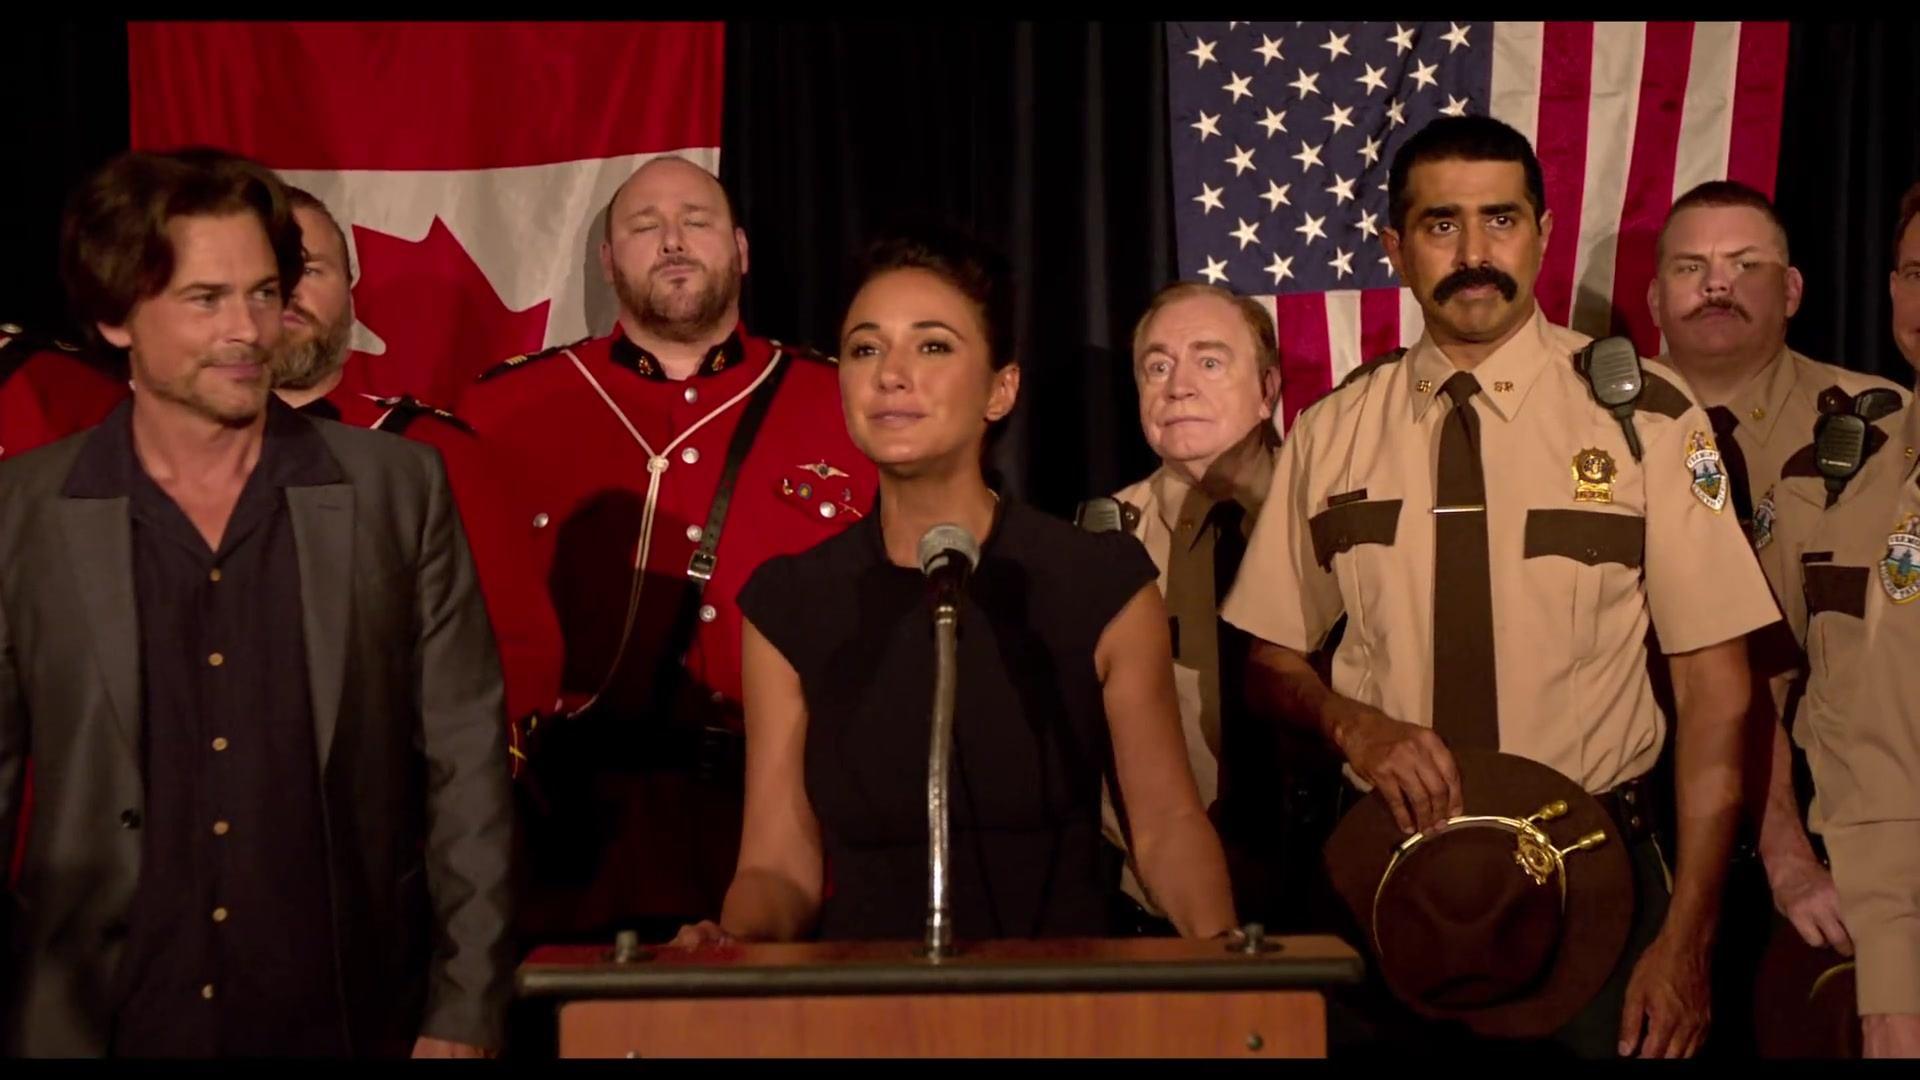 Super Troopers 2 Full Movie Download Free English Version.